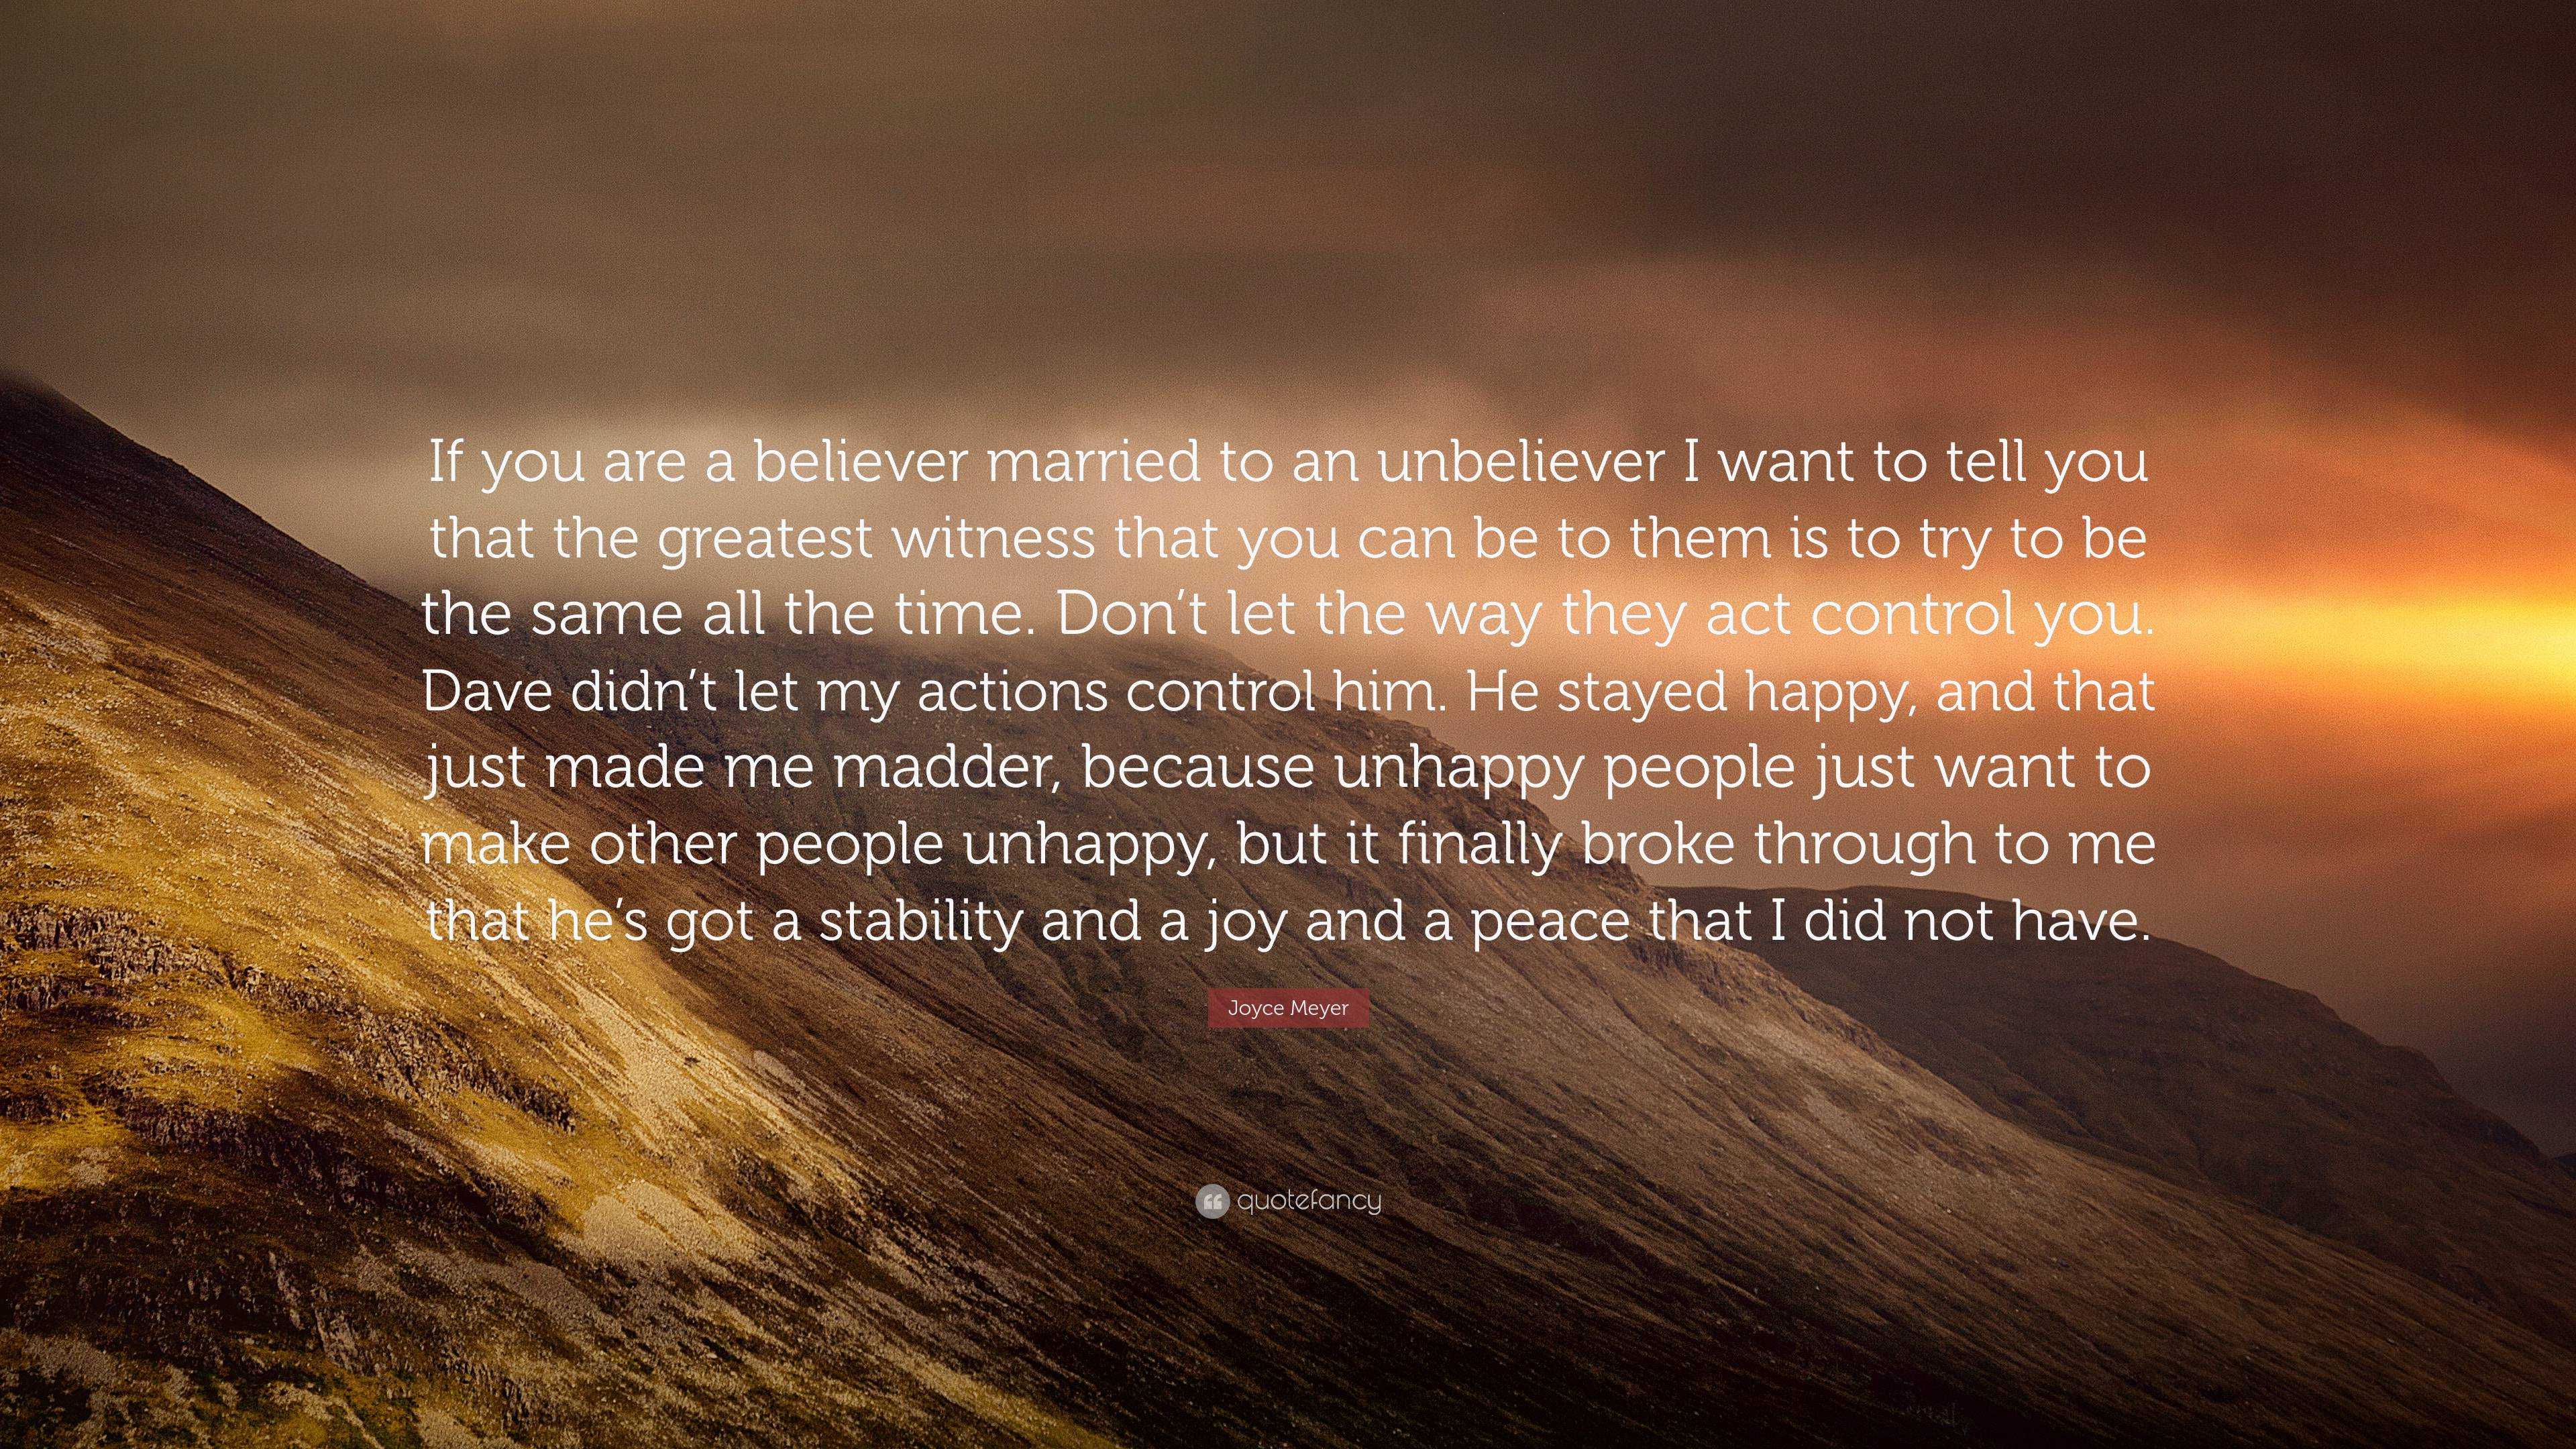 Joyce Meyer Quote: “If you are a believer married to an unbeliever I ...